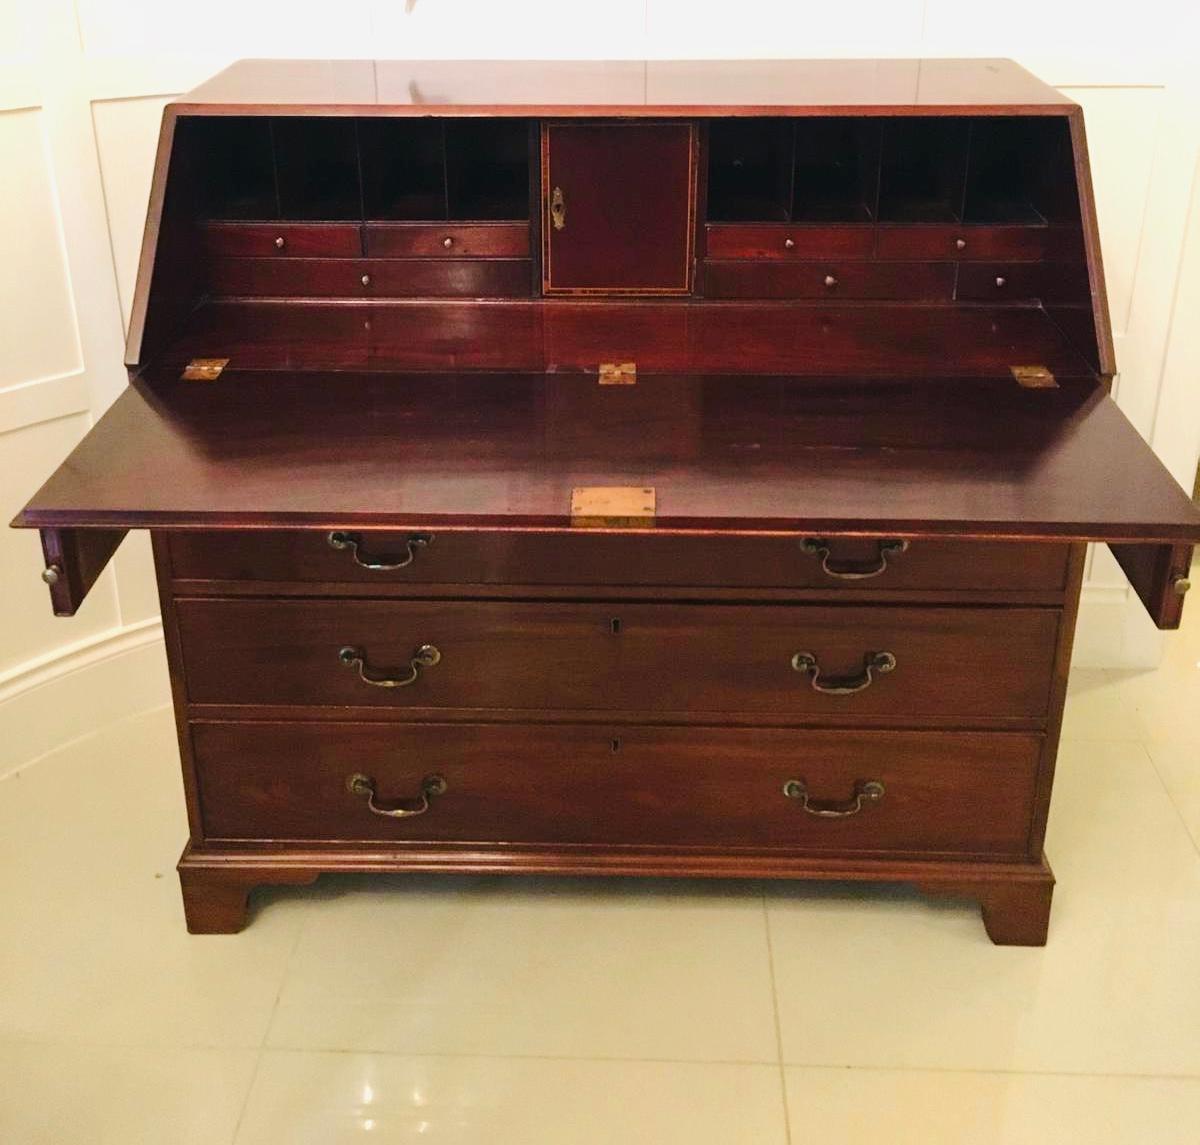 This is an outstanding quality antique 18th century George III mahogany bureau having a quality mahogany fall which opens to reveal a fully fitted interior consisting of seven drawers all with original brass knobs, pigeon holes and a pretty inlaid